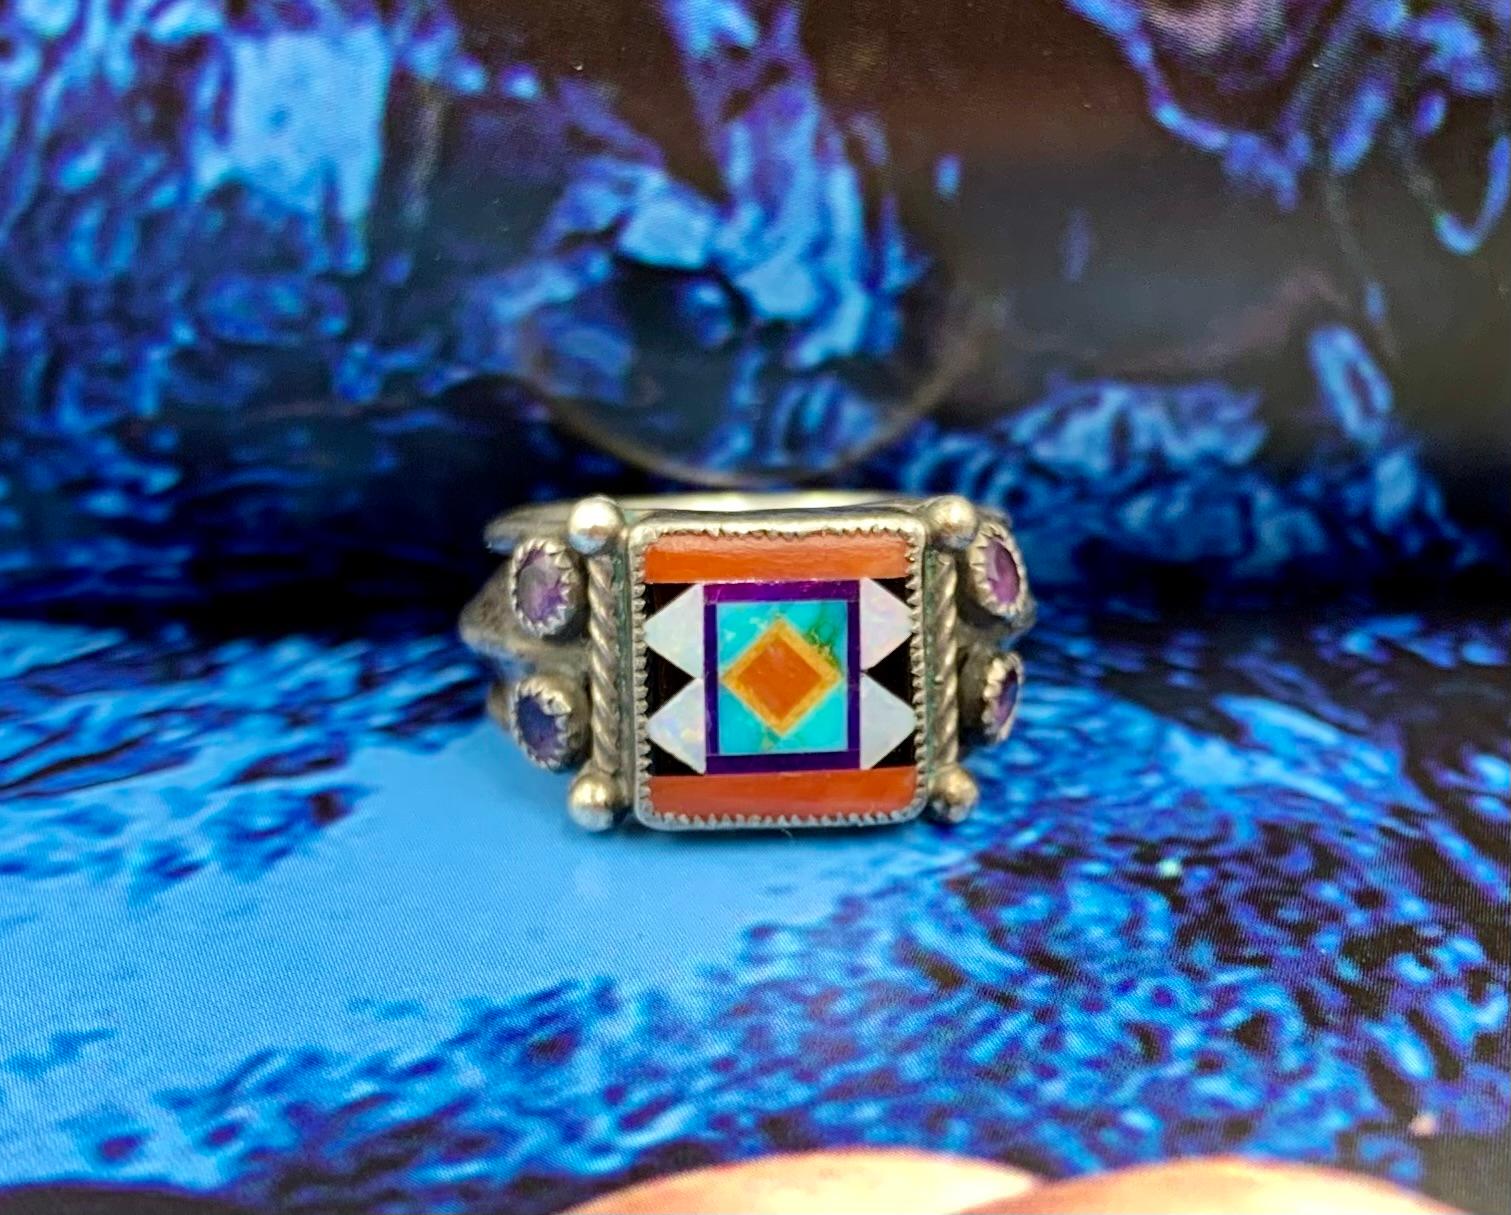 Southwestern Style Aldrich Art inlaid opal, turquoise, jet, lapis lazuli, coral and faceted amethyst sterling silver ring
20th Century
Provenance: estate of a notable New York City psychiatrist and artistic, often one-of-a-kind jewelry